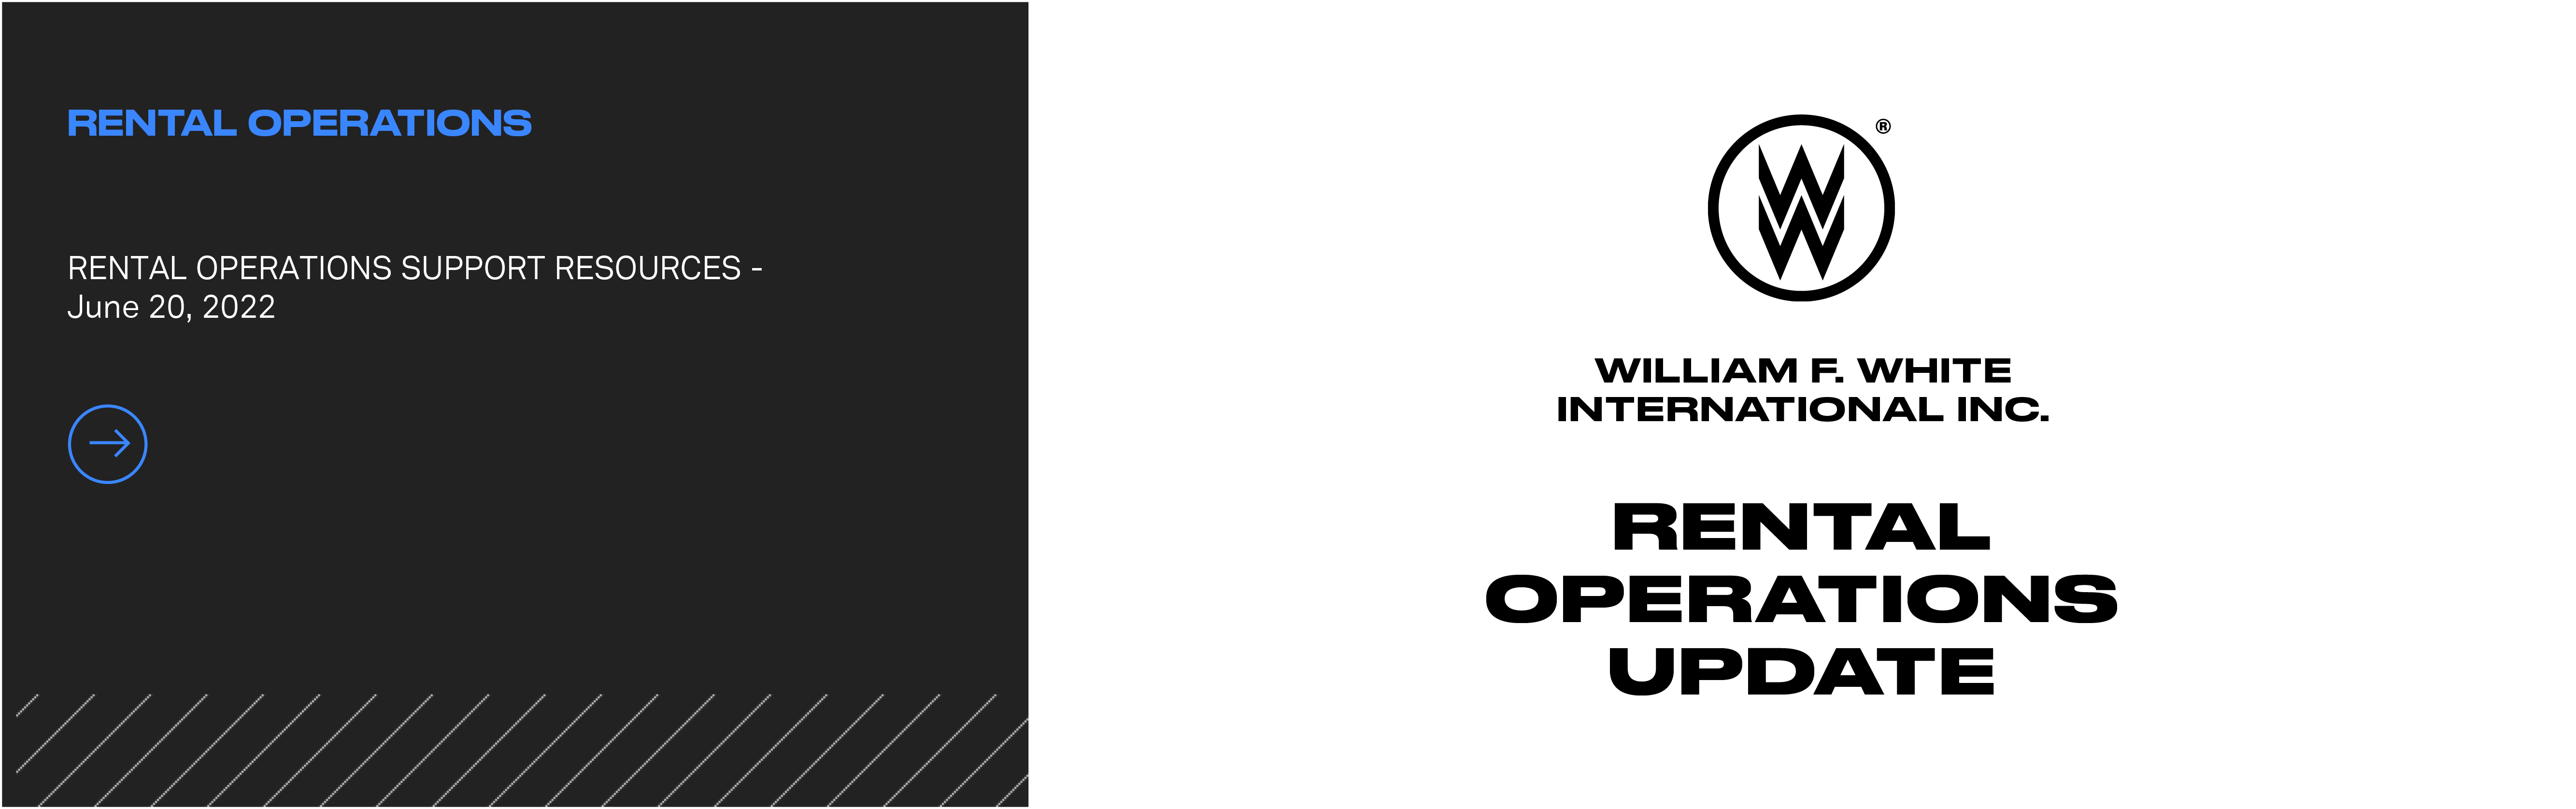 rental_operations_update_-_banner_0_0.png